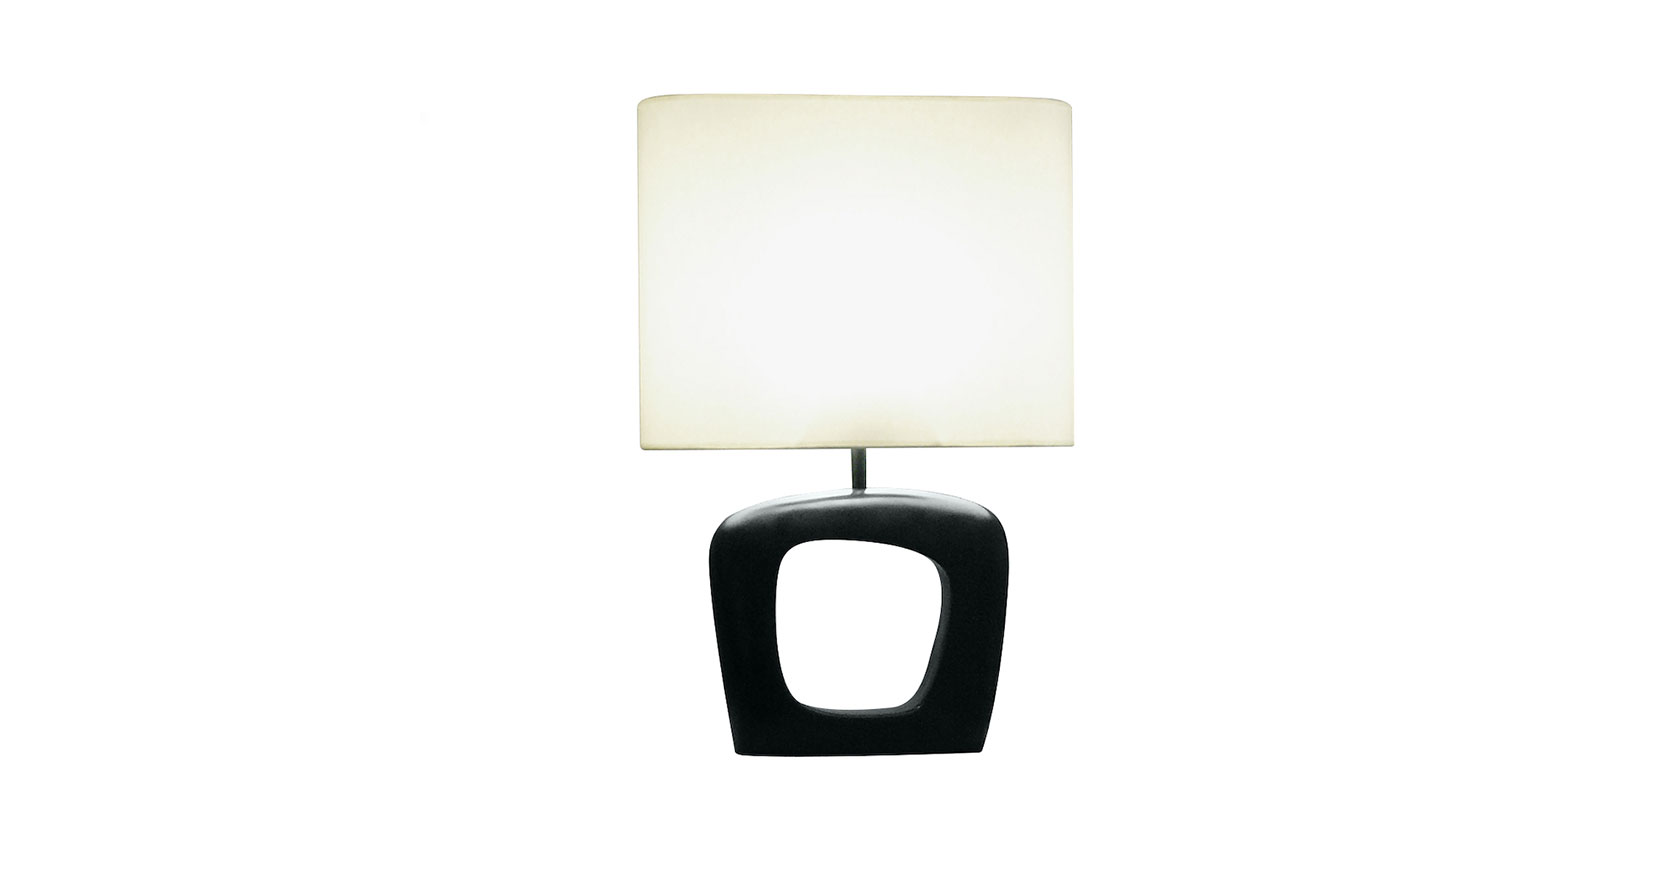 Christian Ghion, minimalist lamp in the 50's style, base in black bronze with a hole in the center, oval white shade